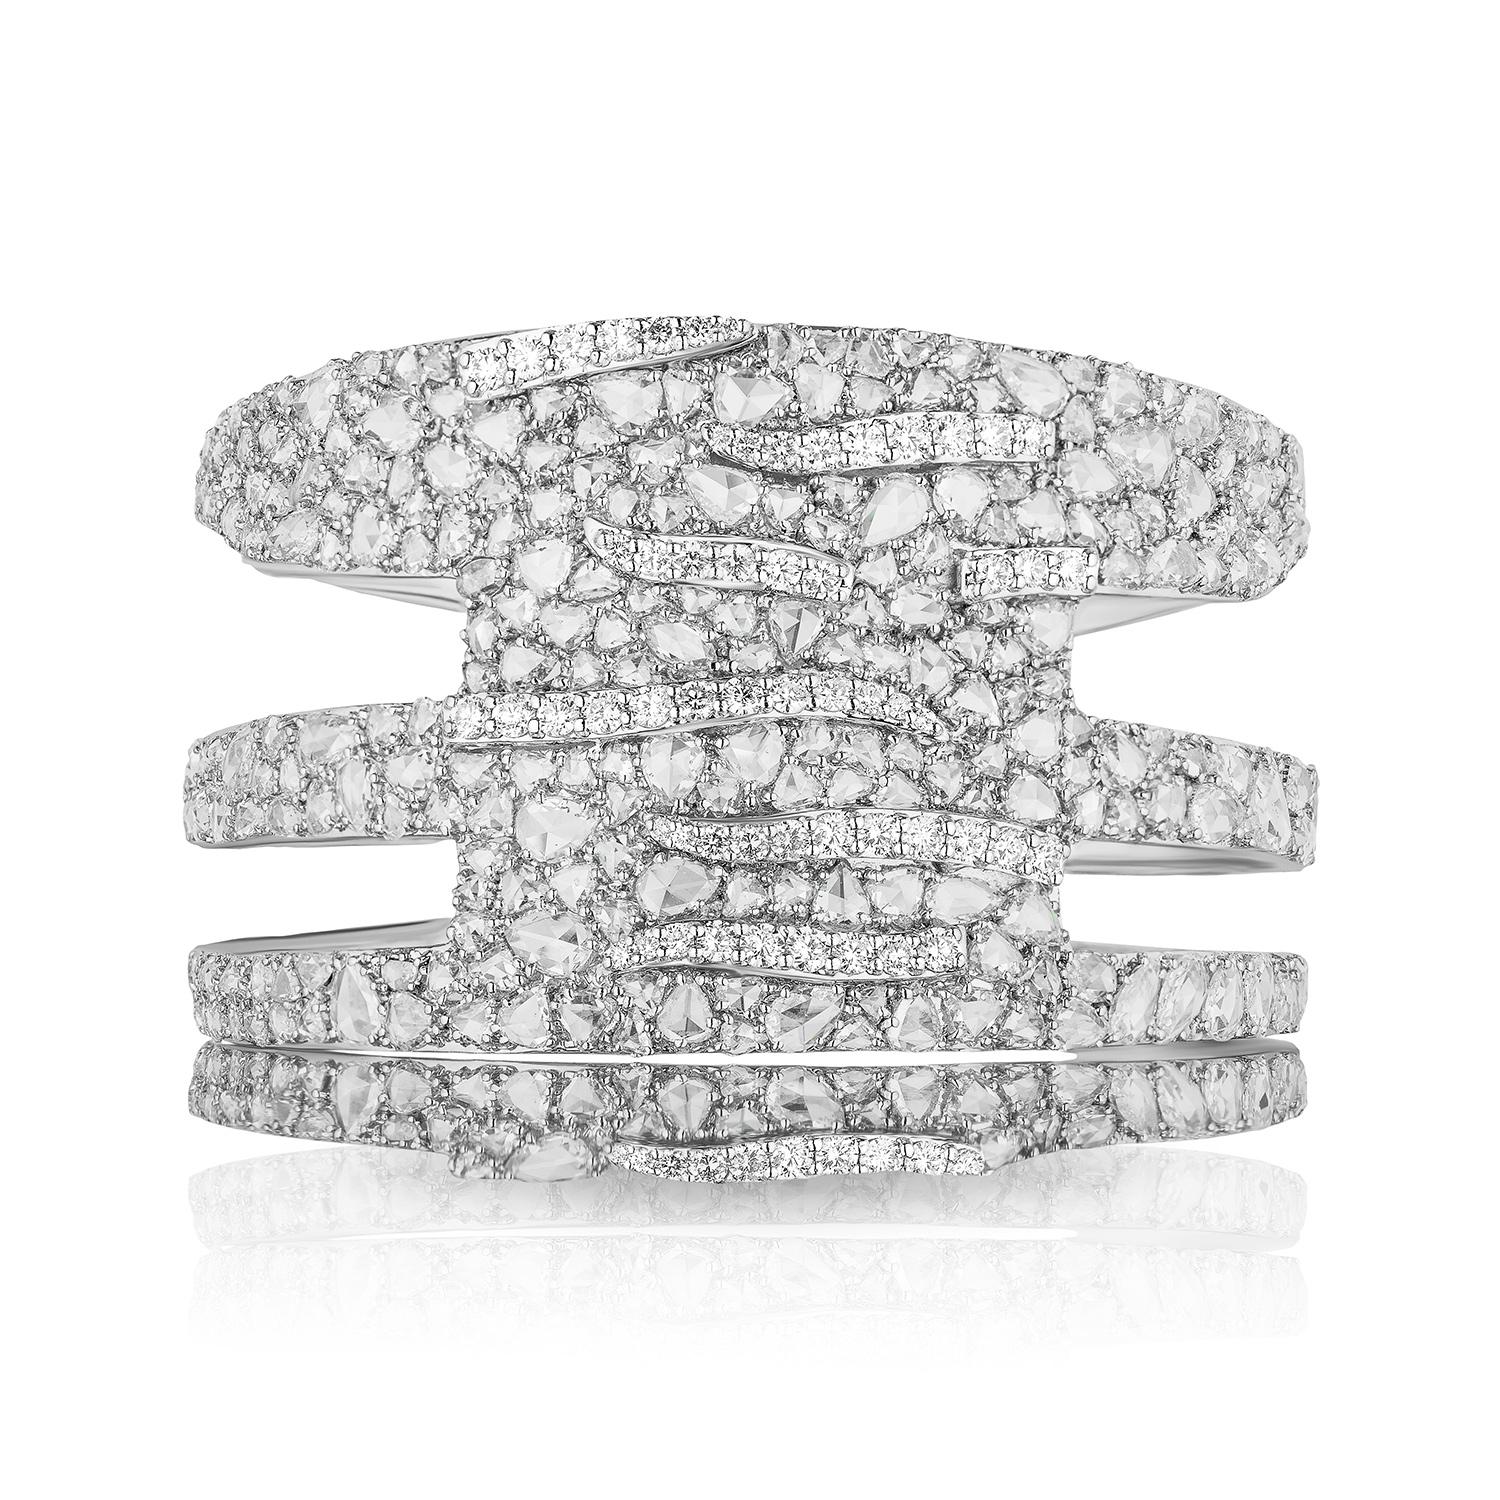 Beautiful and Unique Wide Cuff Bangle.

Features Various shaped Rose Cut Diamonds set in a free form style with abstract lines of modern round brilliant diamonds. 

Modern artistry of nature coming together to interpret the flowing lines of a white